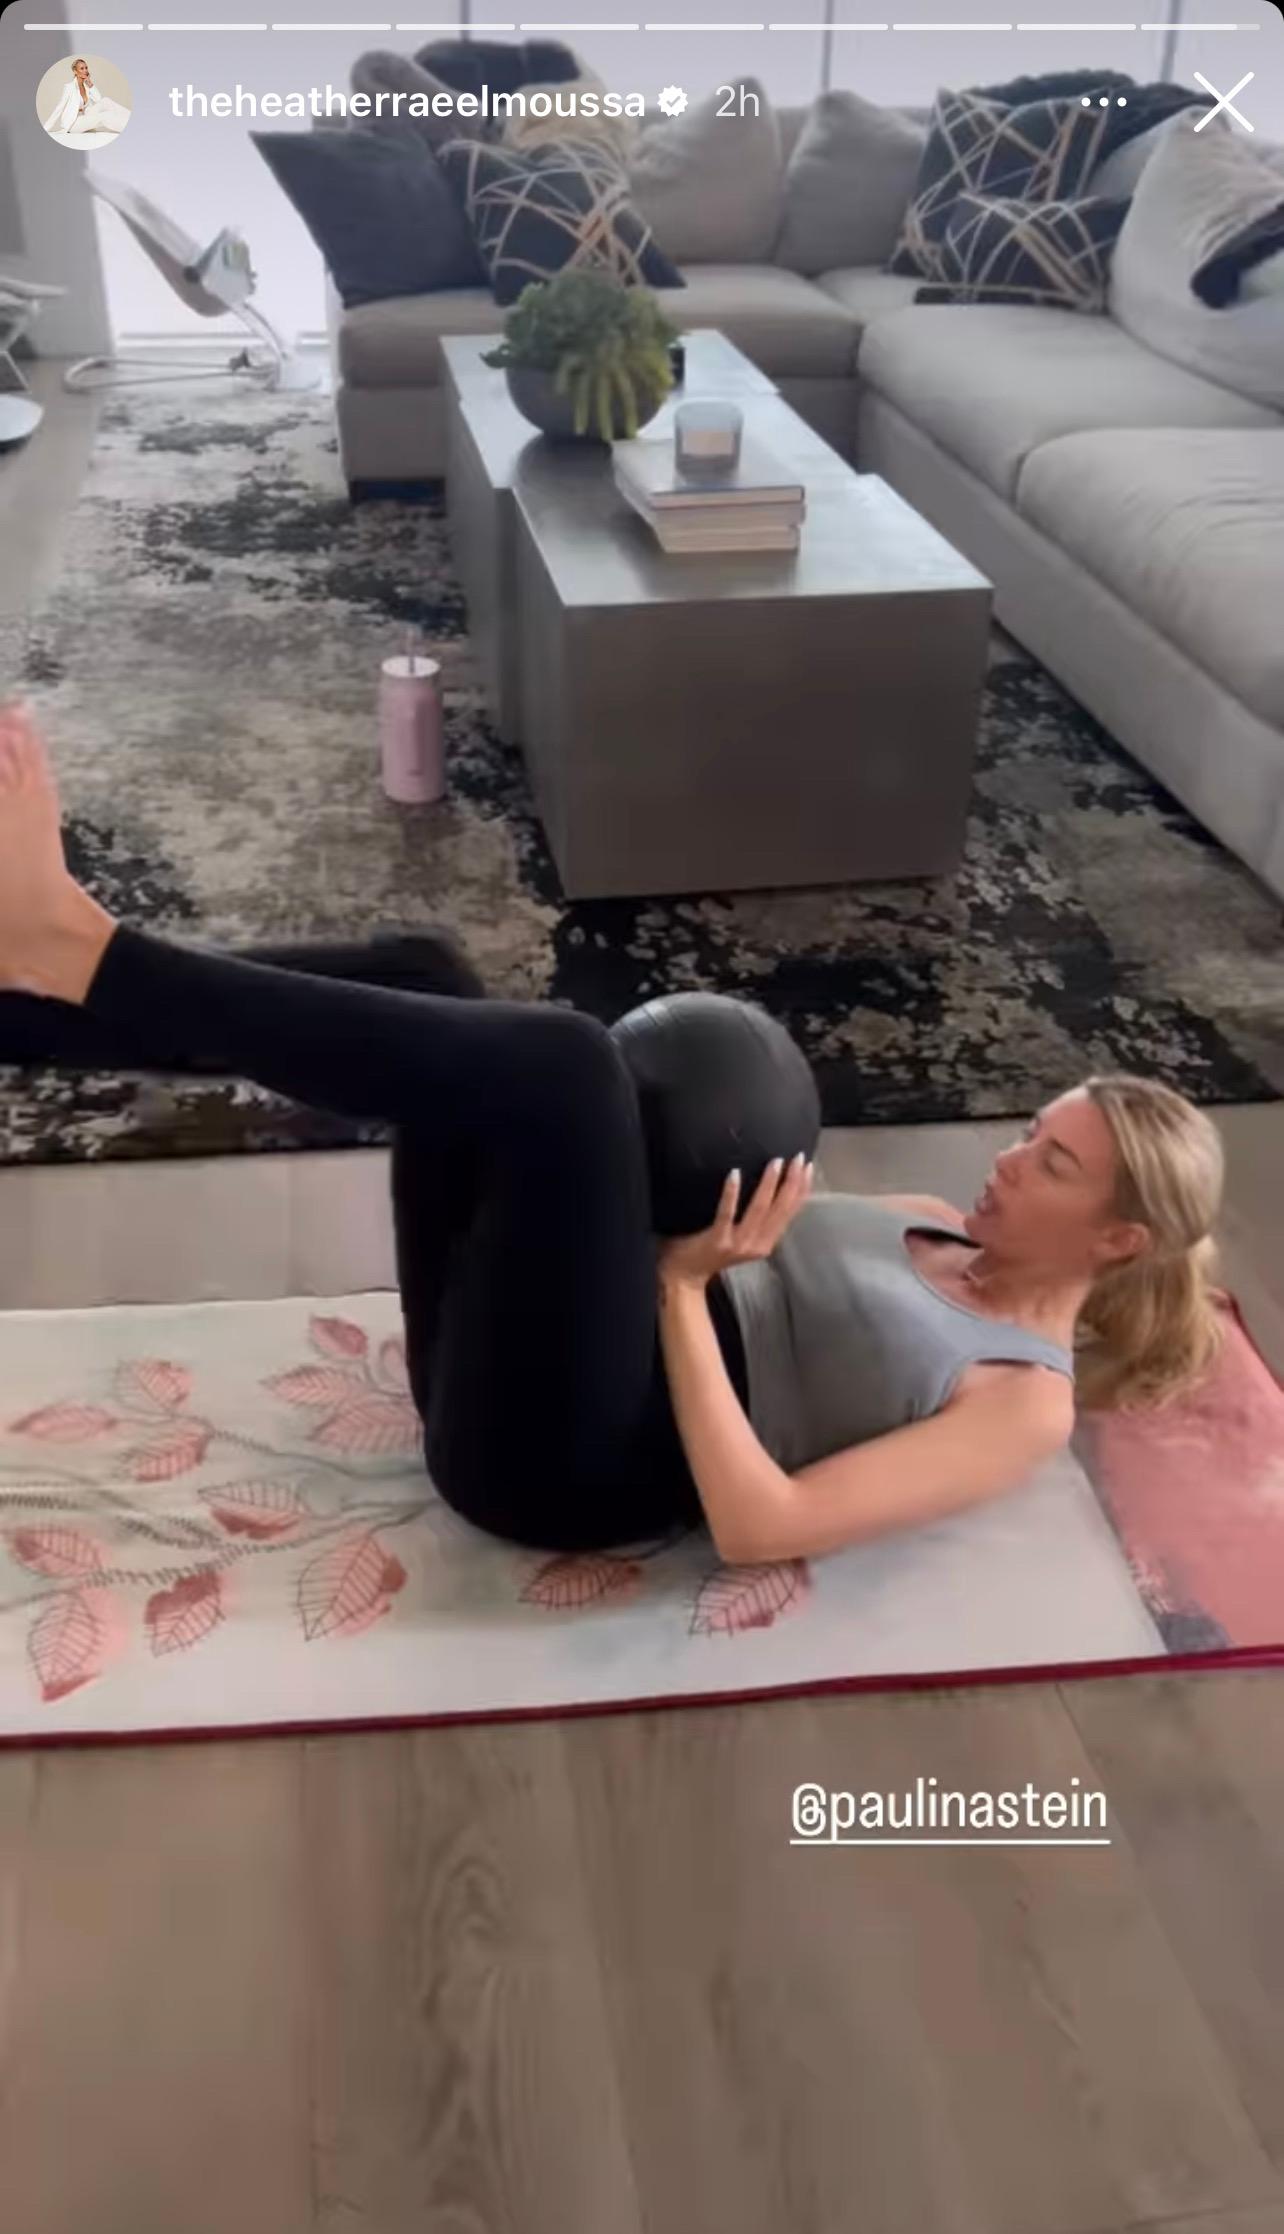 Carrie Underwood Wows Instagram In Yoga Pants Stretch - The Blast